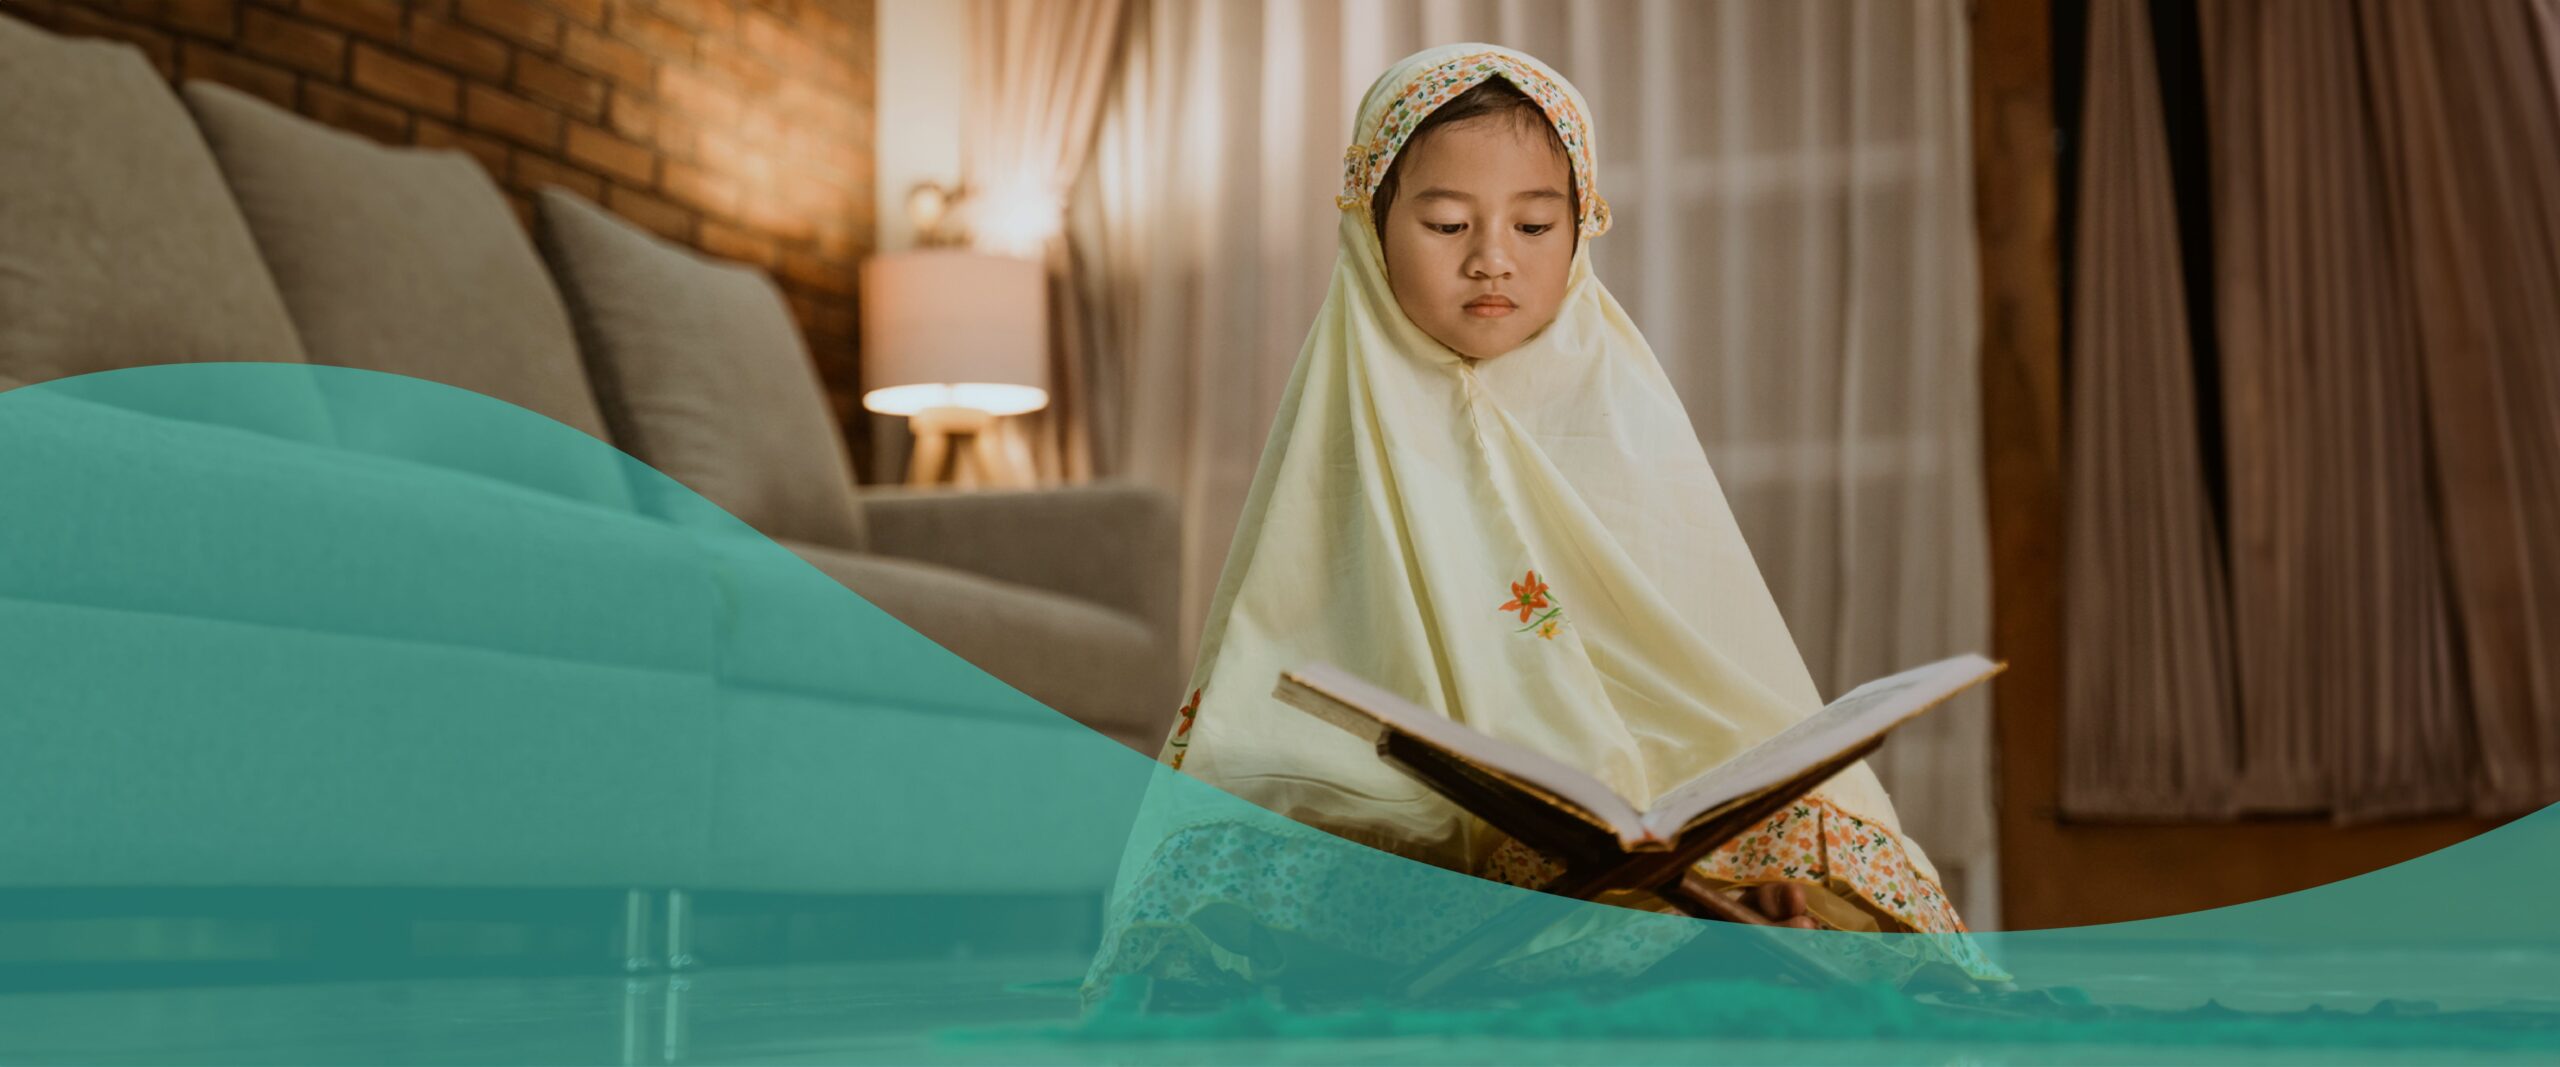 Benefits of Memorizing the Holy Quran for Children: Psychological and Social Aspects